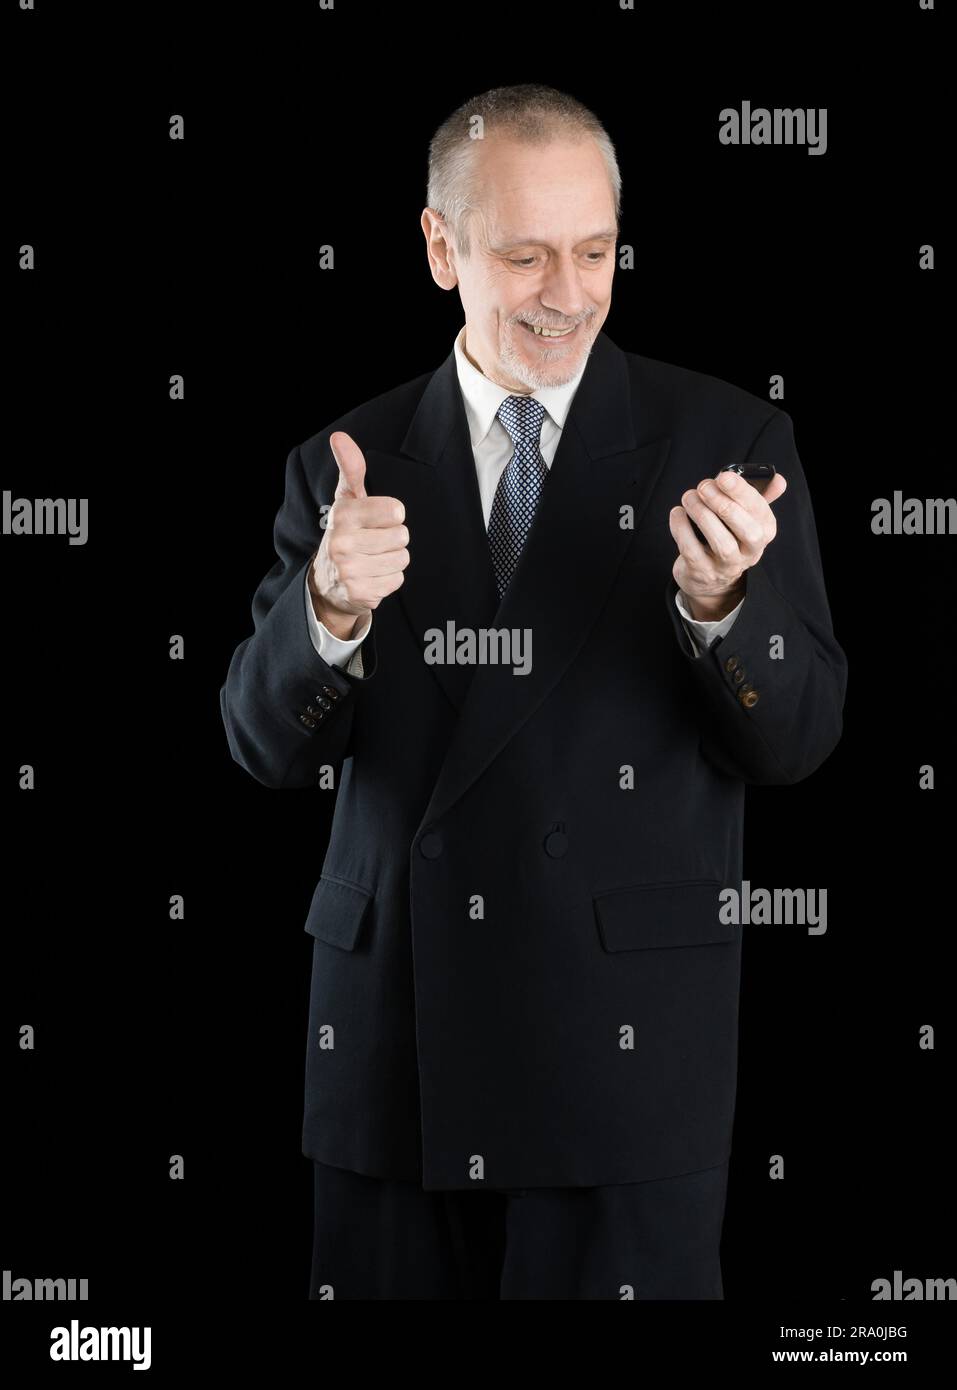 An amiable businessman wearing a black suit smiling and reading on mobile phone, with thumb up, on black background Stock Photo